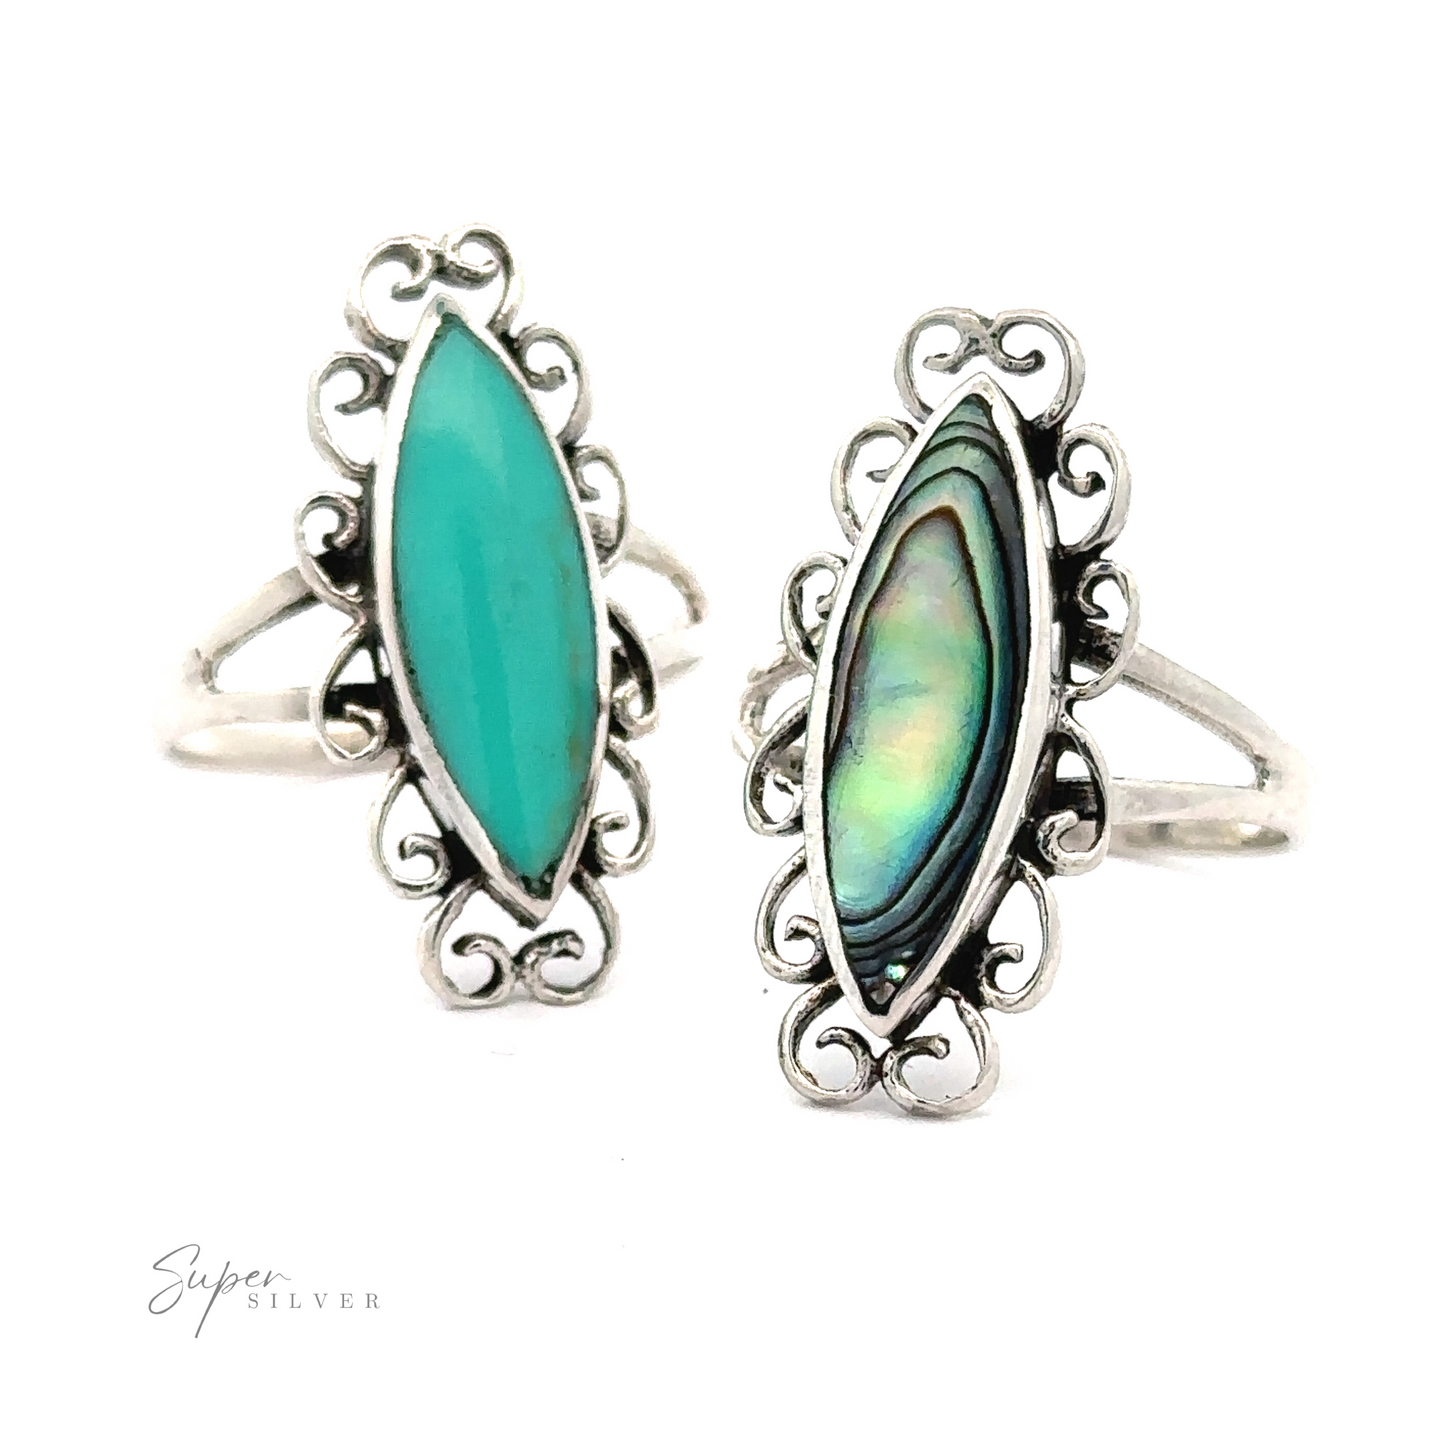 This pair of Elegant Inlay Stone Marquise Rings With Swirls features a marquise turquoise and abalone shell inlay stone design.